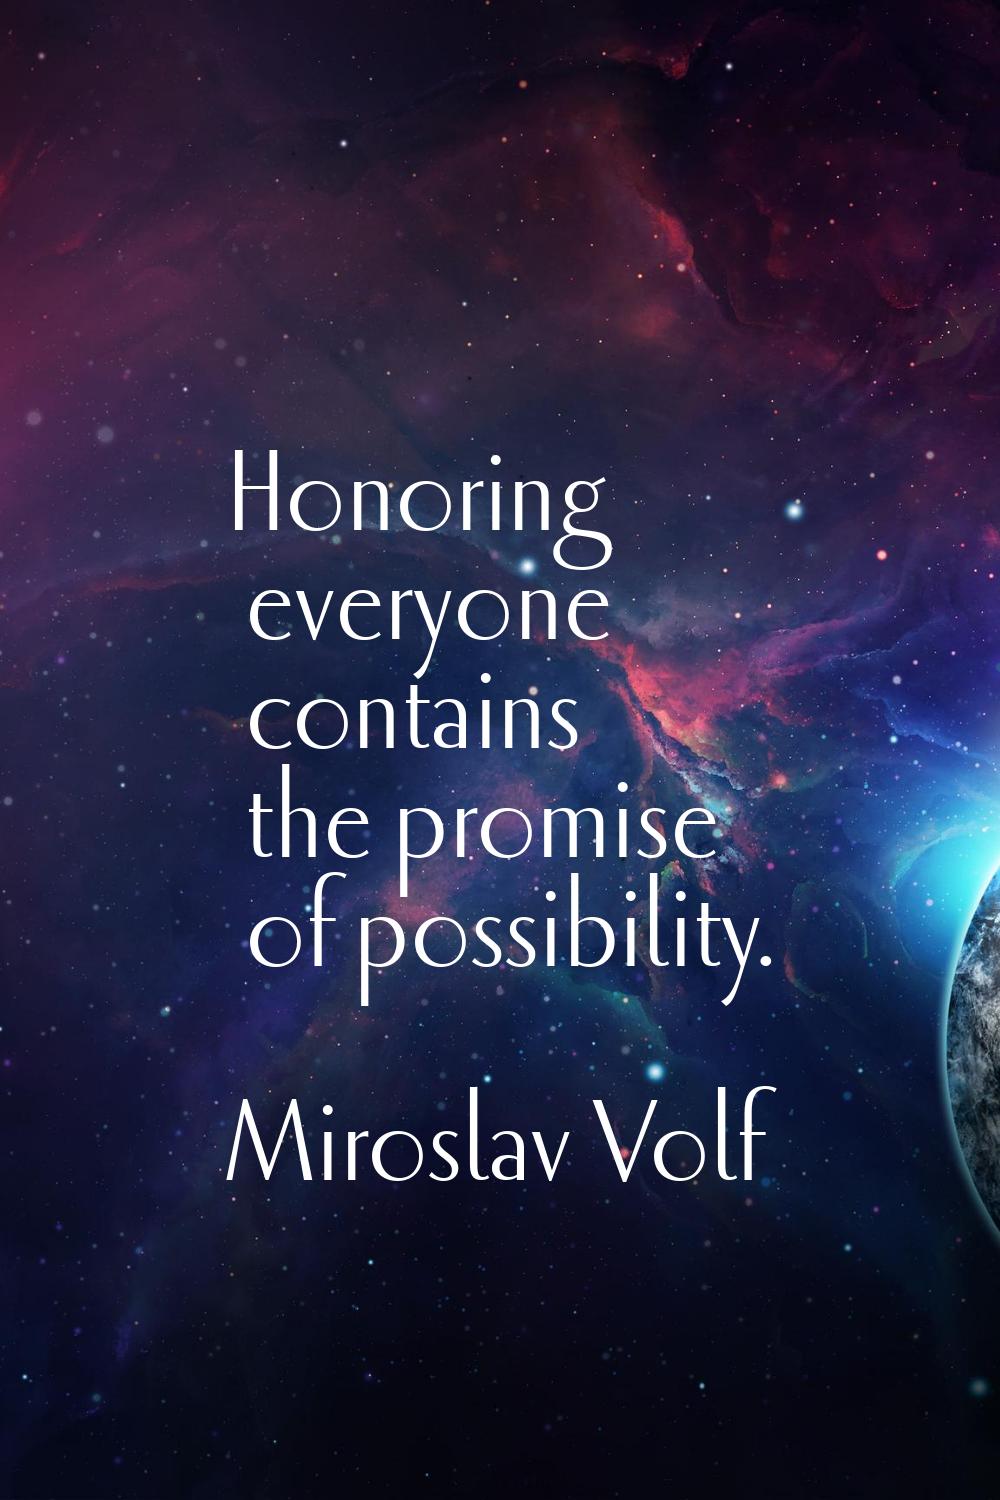 Honoring everyone contains the promise of possibility.